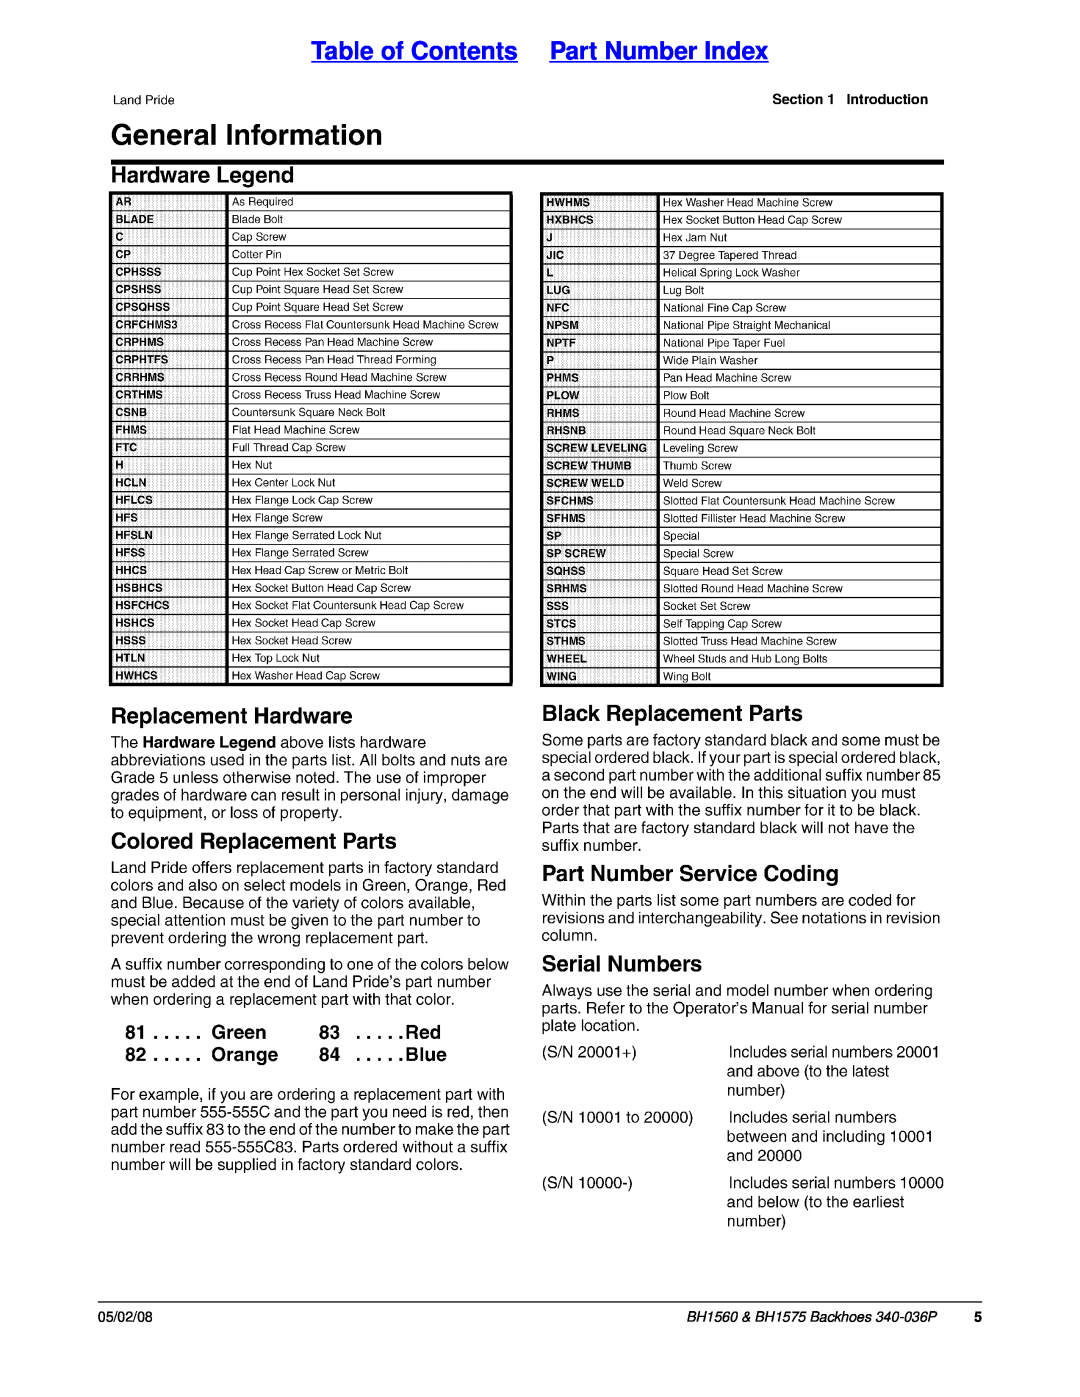 Land Pride manual Table of Contents Part Number Index, BH1560 & BH1575 Backhoes 340-036P, 05/02/08 